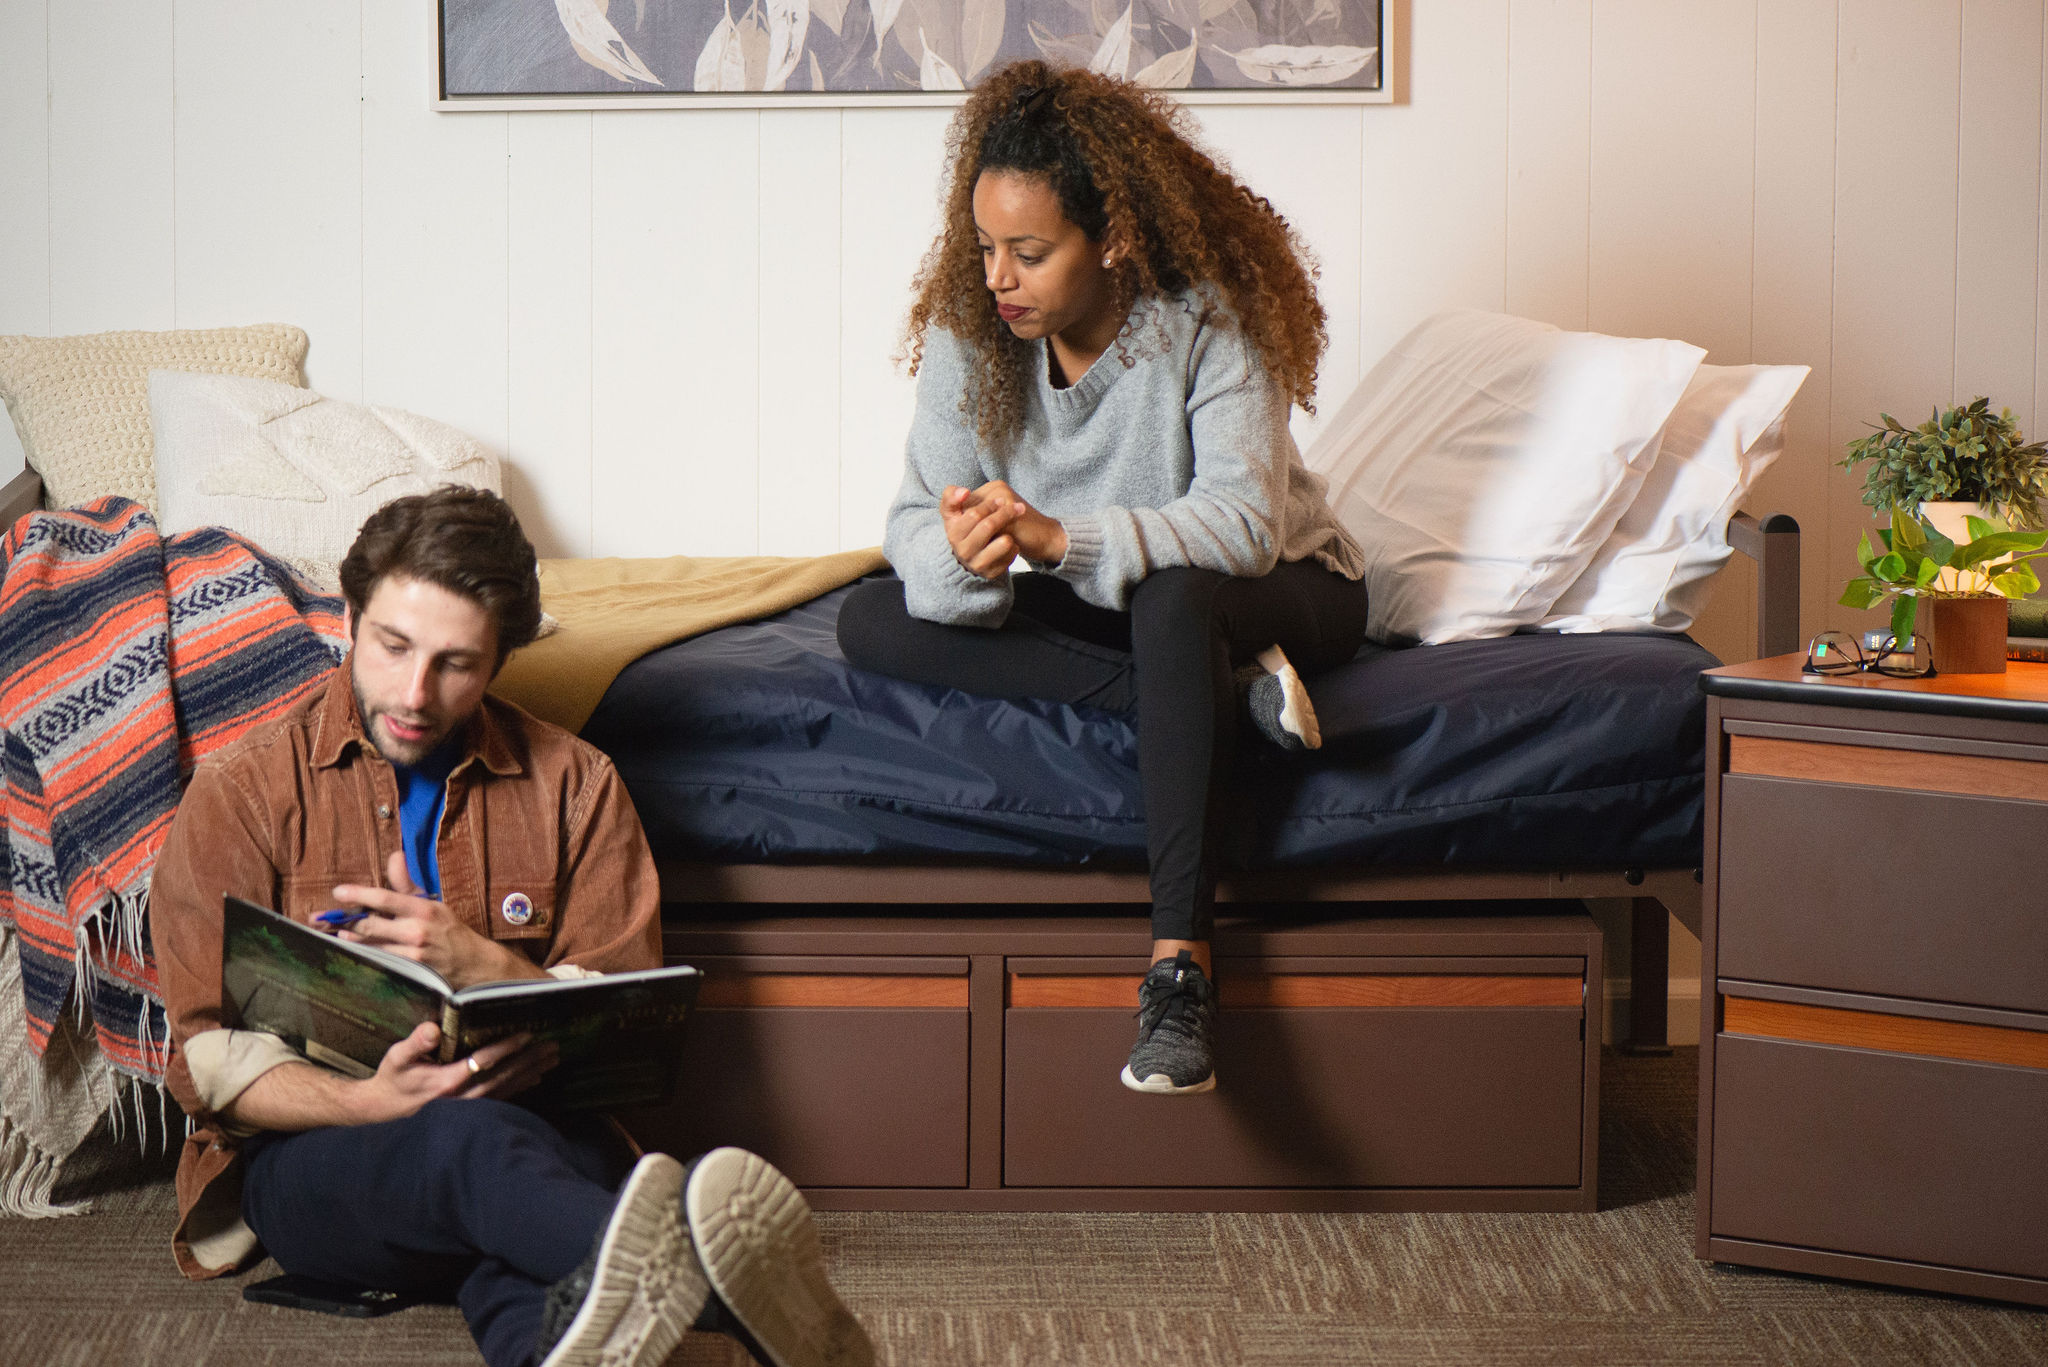 Students in dorm studying on bed